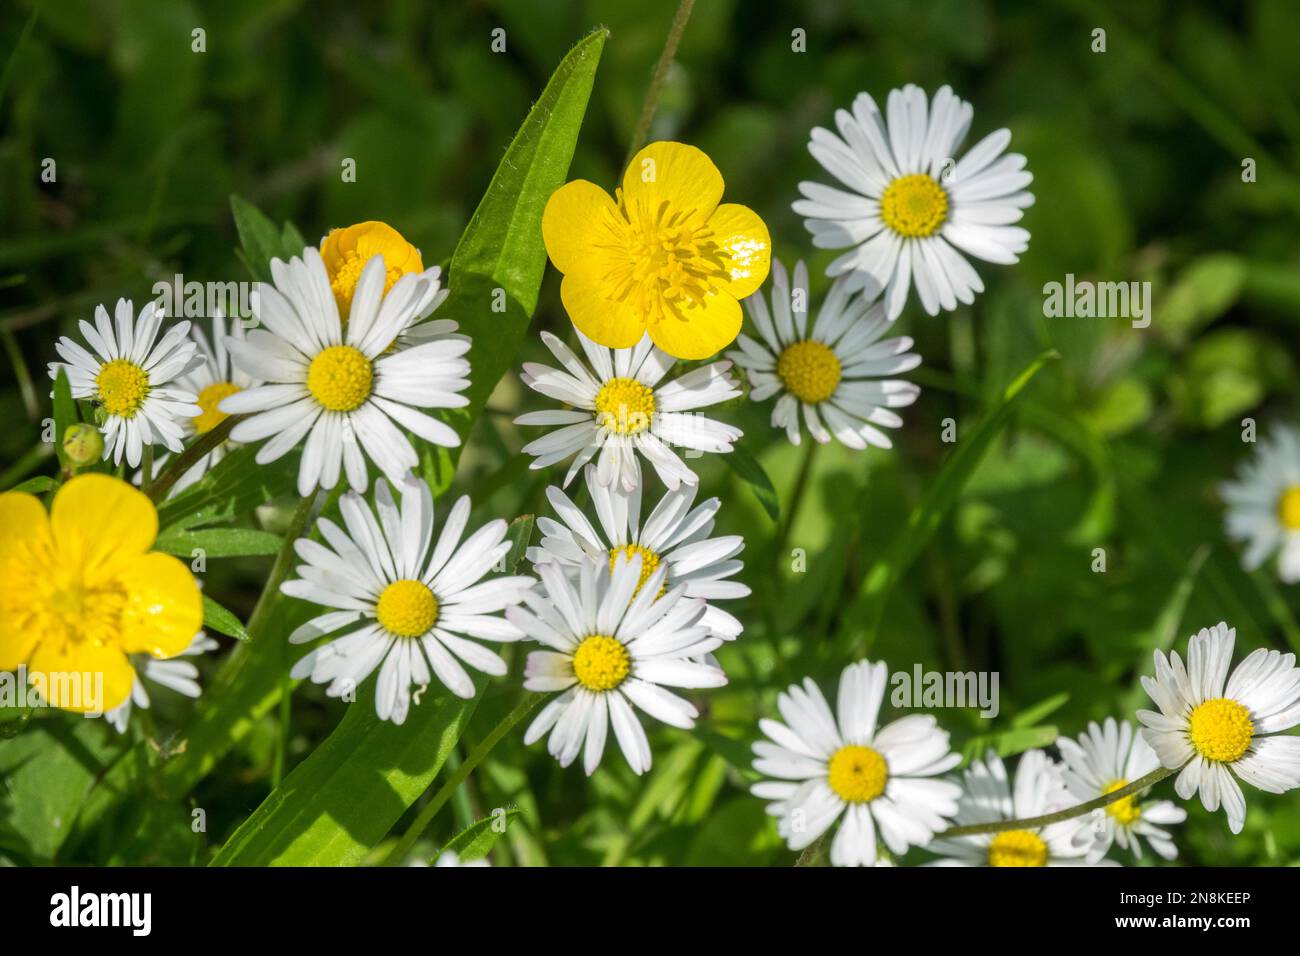 Common, Daisies, Creeping buttercup, Ranunculus repens, Lawn, Wildflowers, Garden, Flowers, Bellis perennis, Common daisy, Lawn daisy, Close-up, White, Yellow Stock Photo